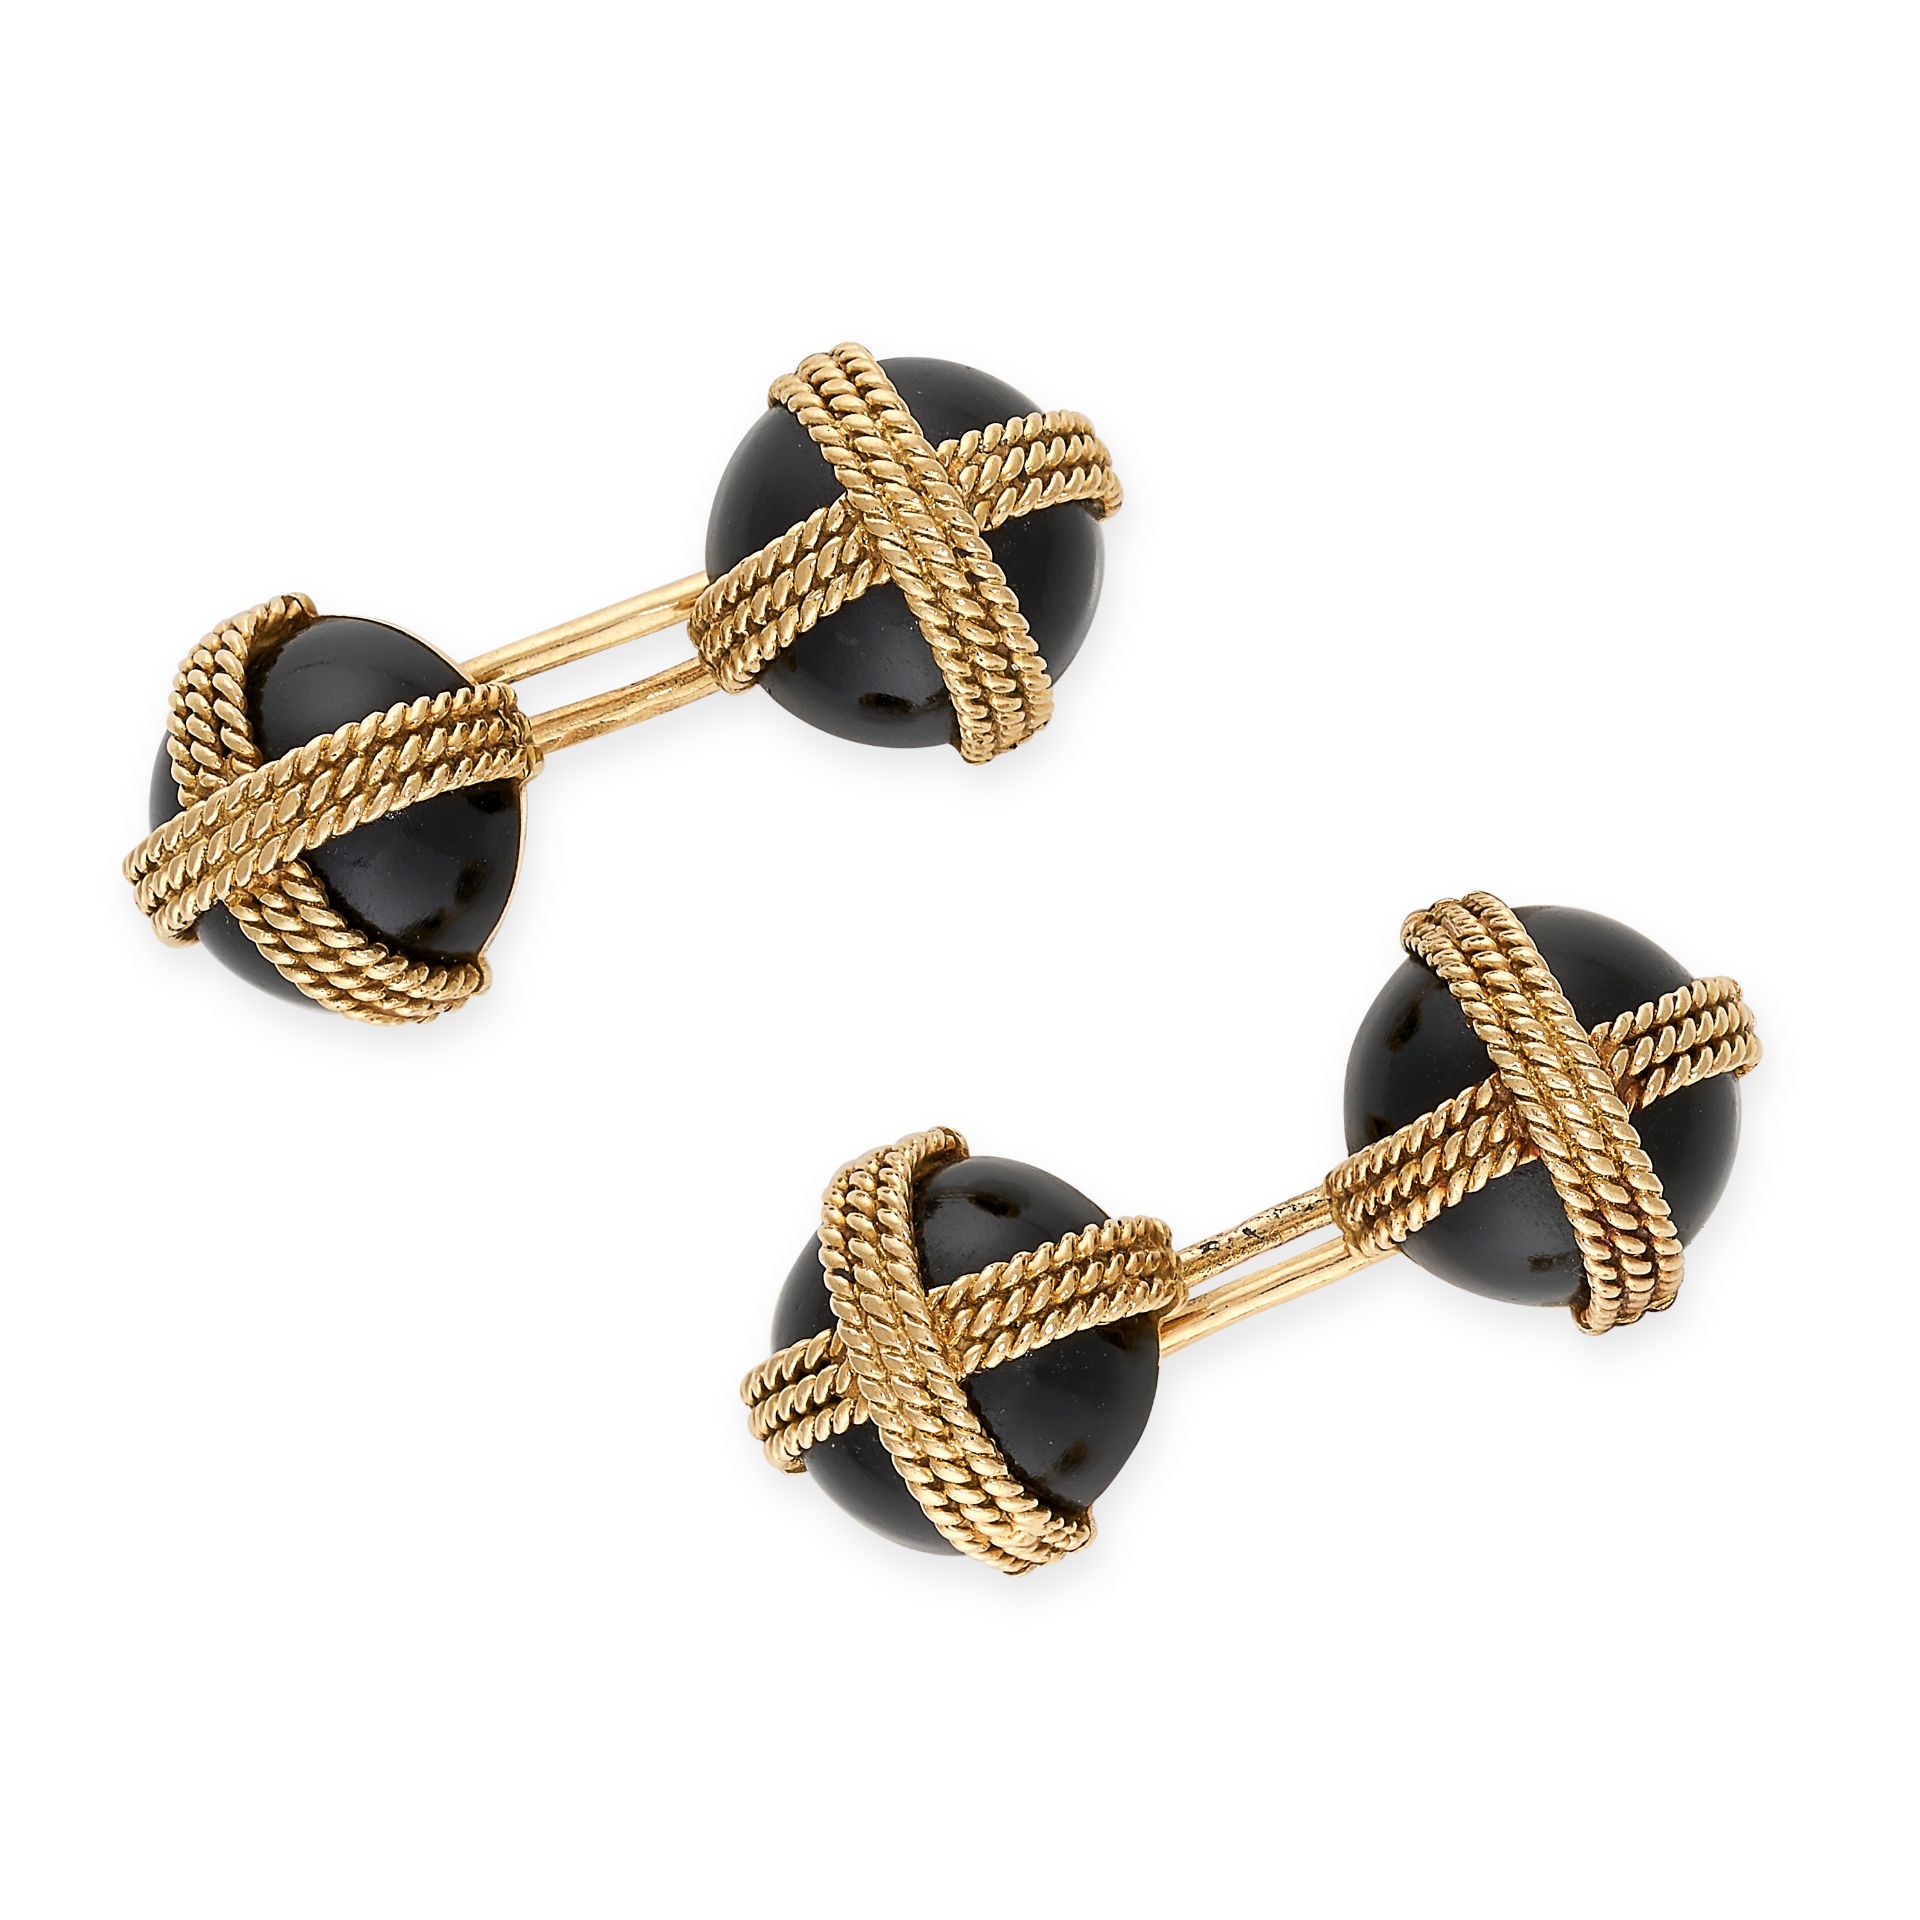 VAN CLEEF AND ARPELS, A PAIR OF ONYX CUFFLINKS, in 18ct yellow gold, each cufflink with two piece...